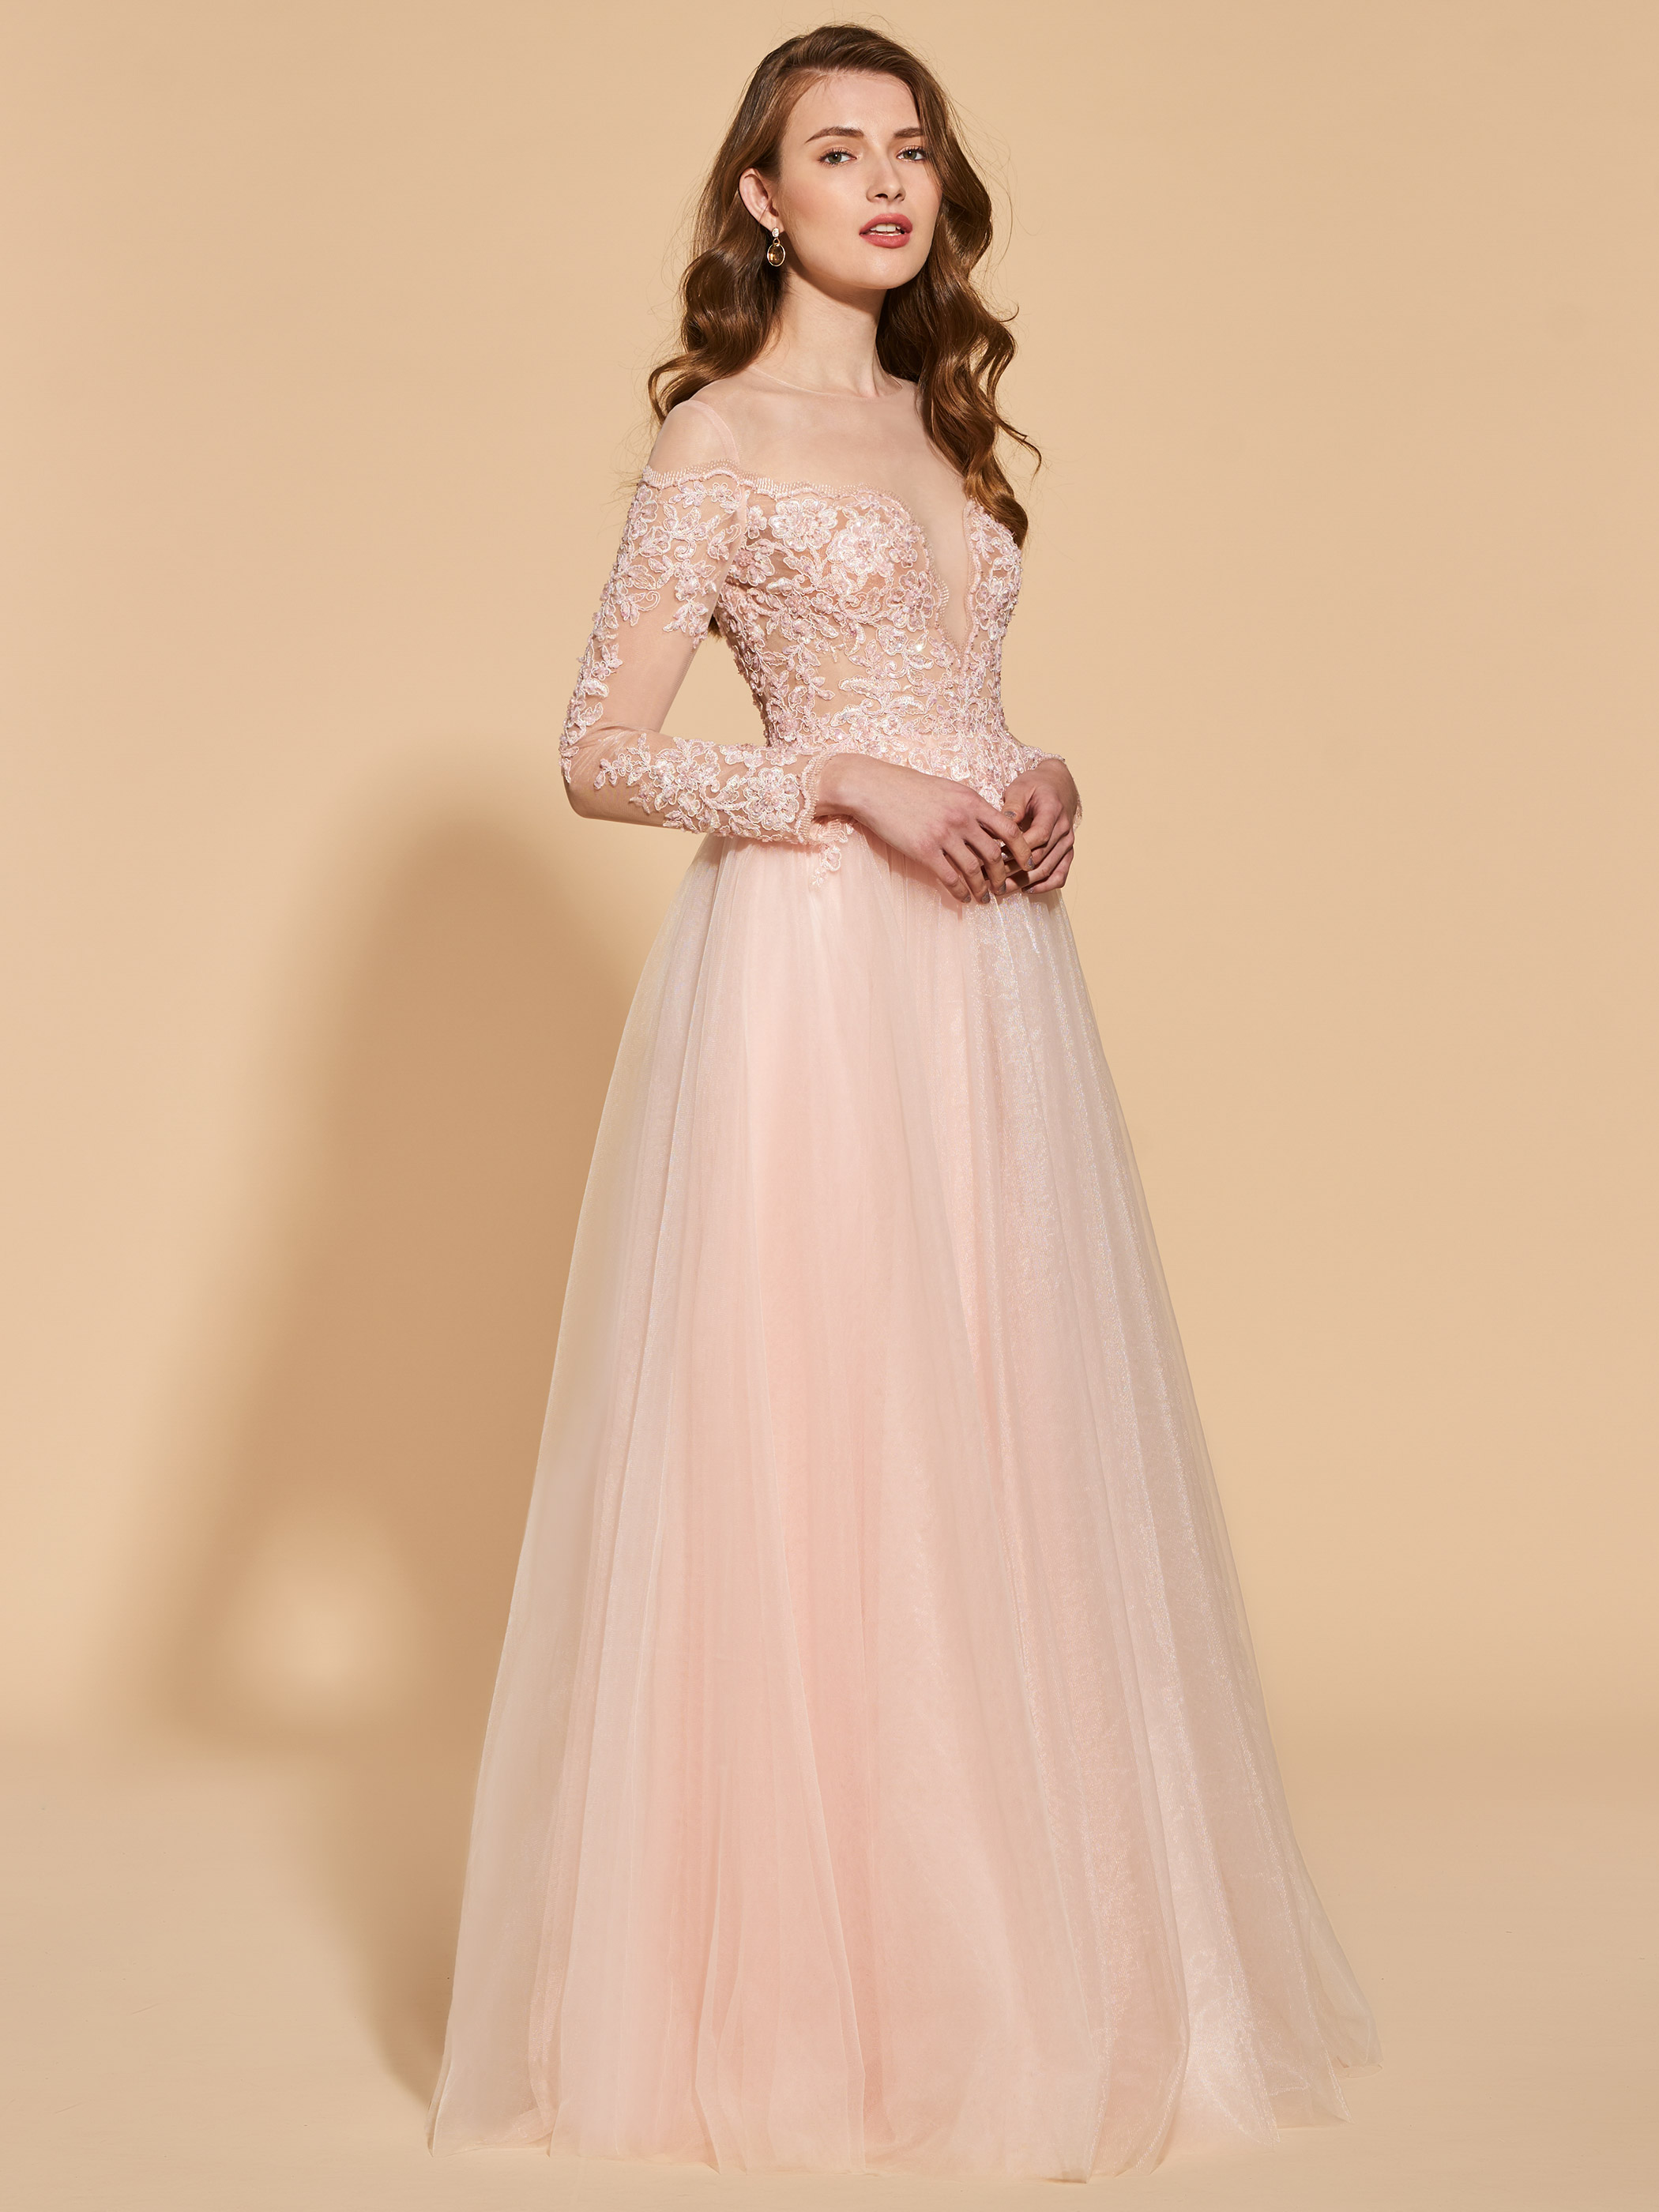 Ericdress A Line Applique Lace Long Sleeve Prom Dress